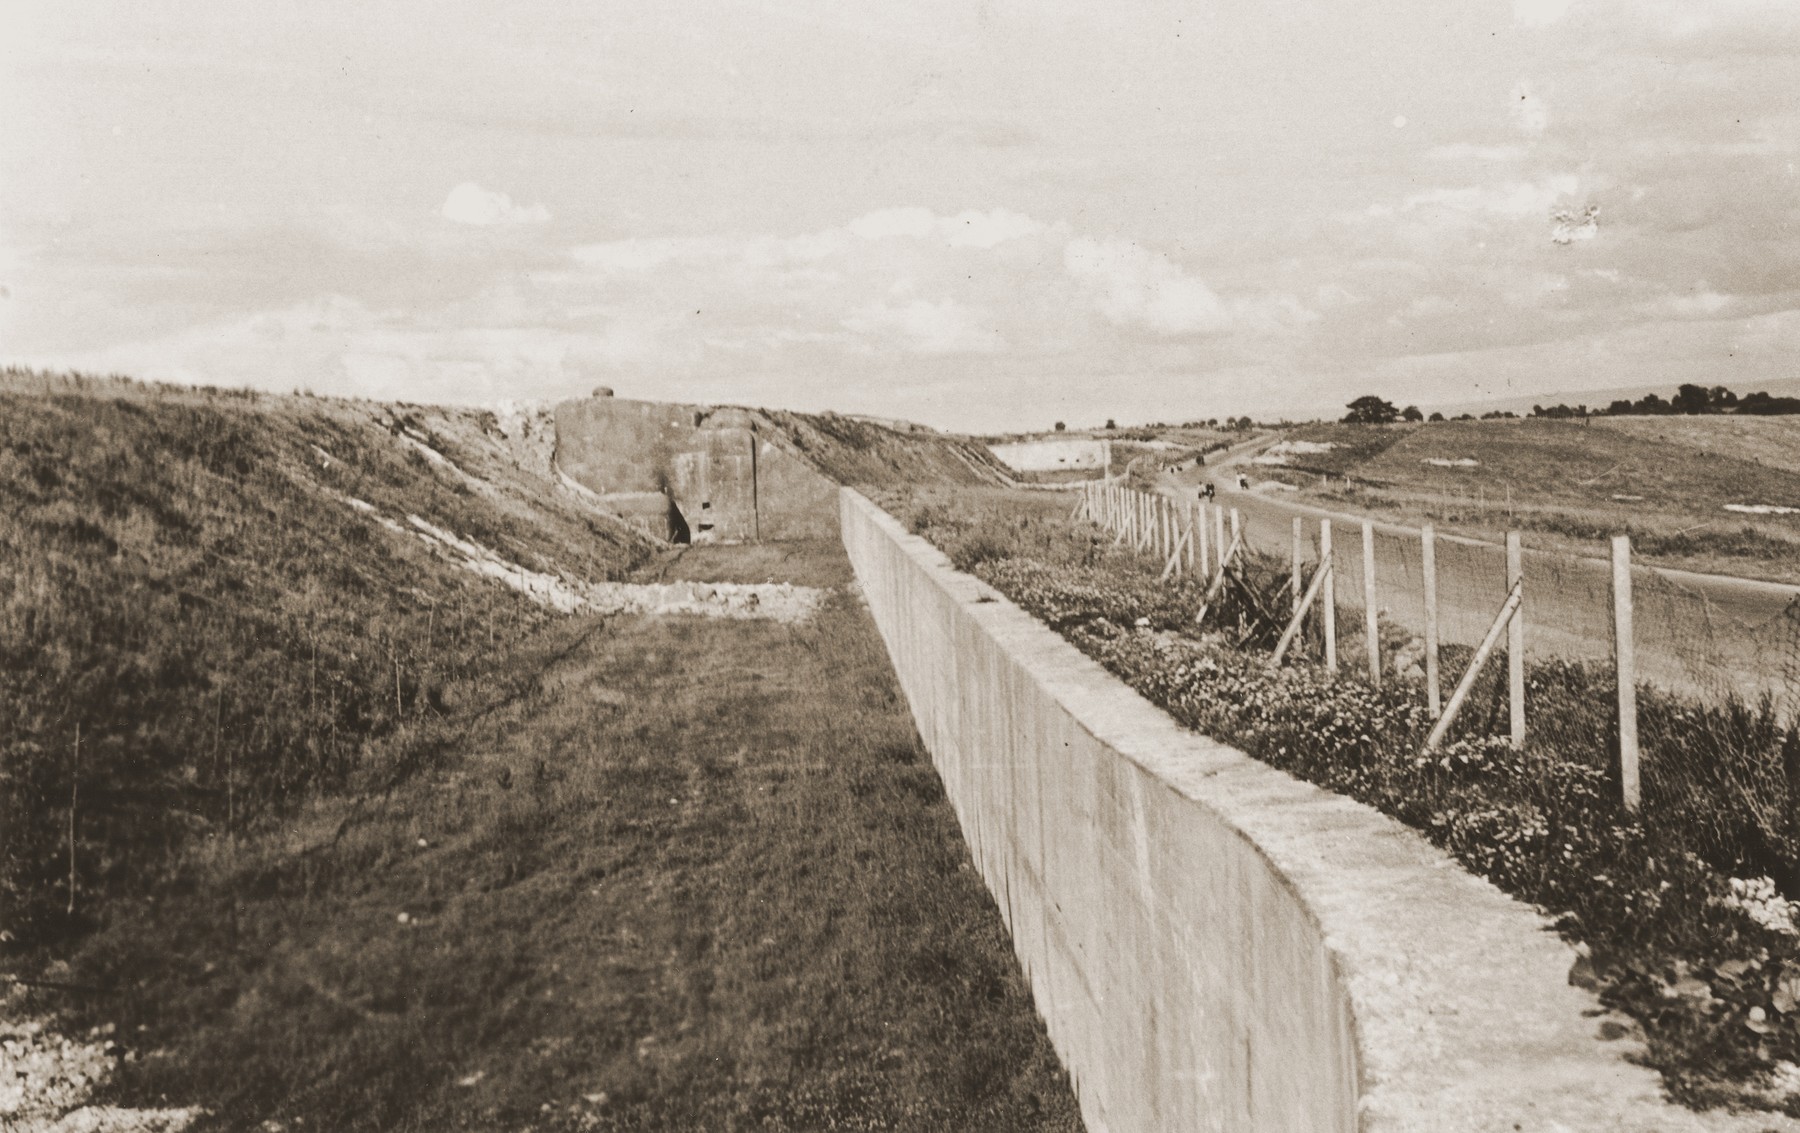 View of a section of the Maginot Line after the defeat of France.